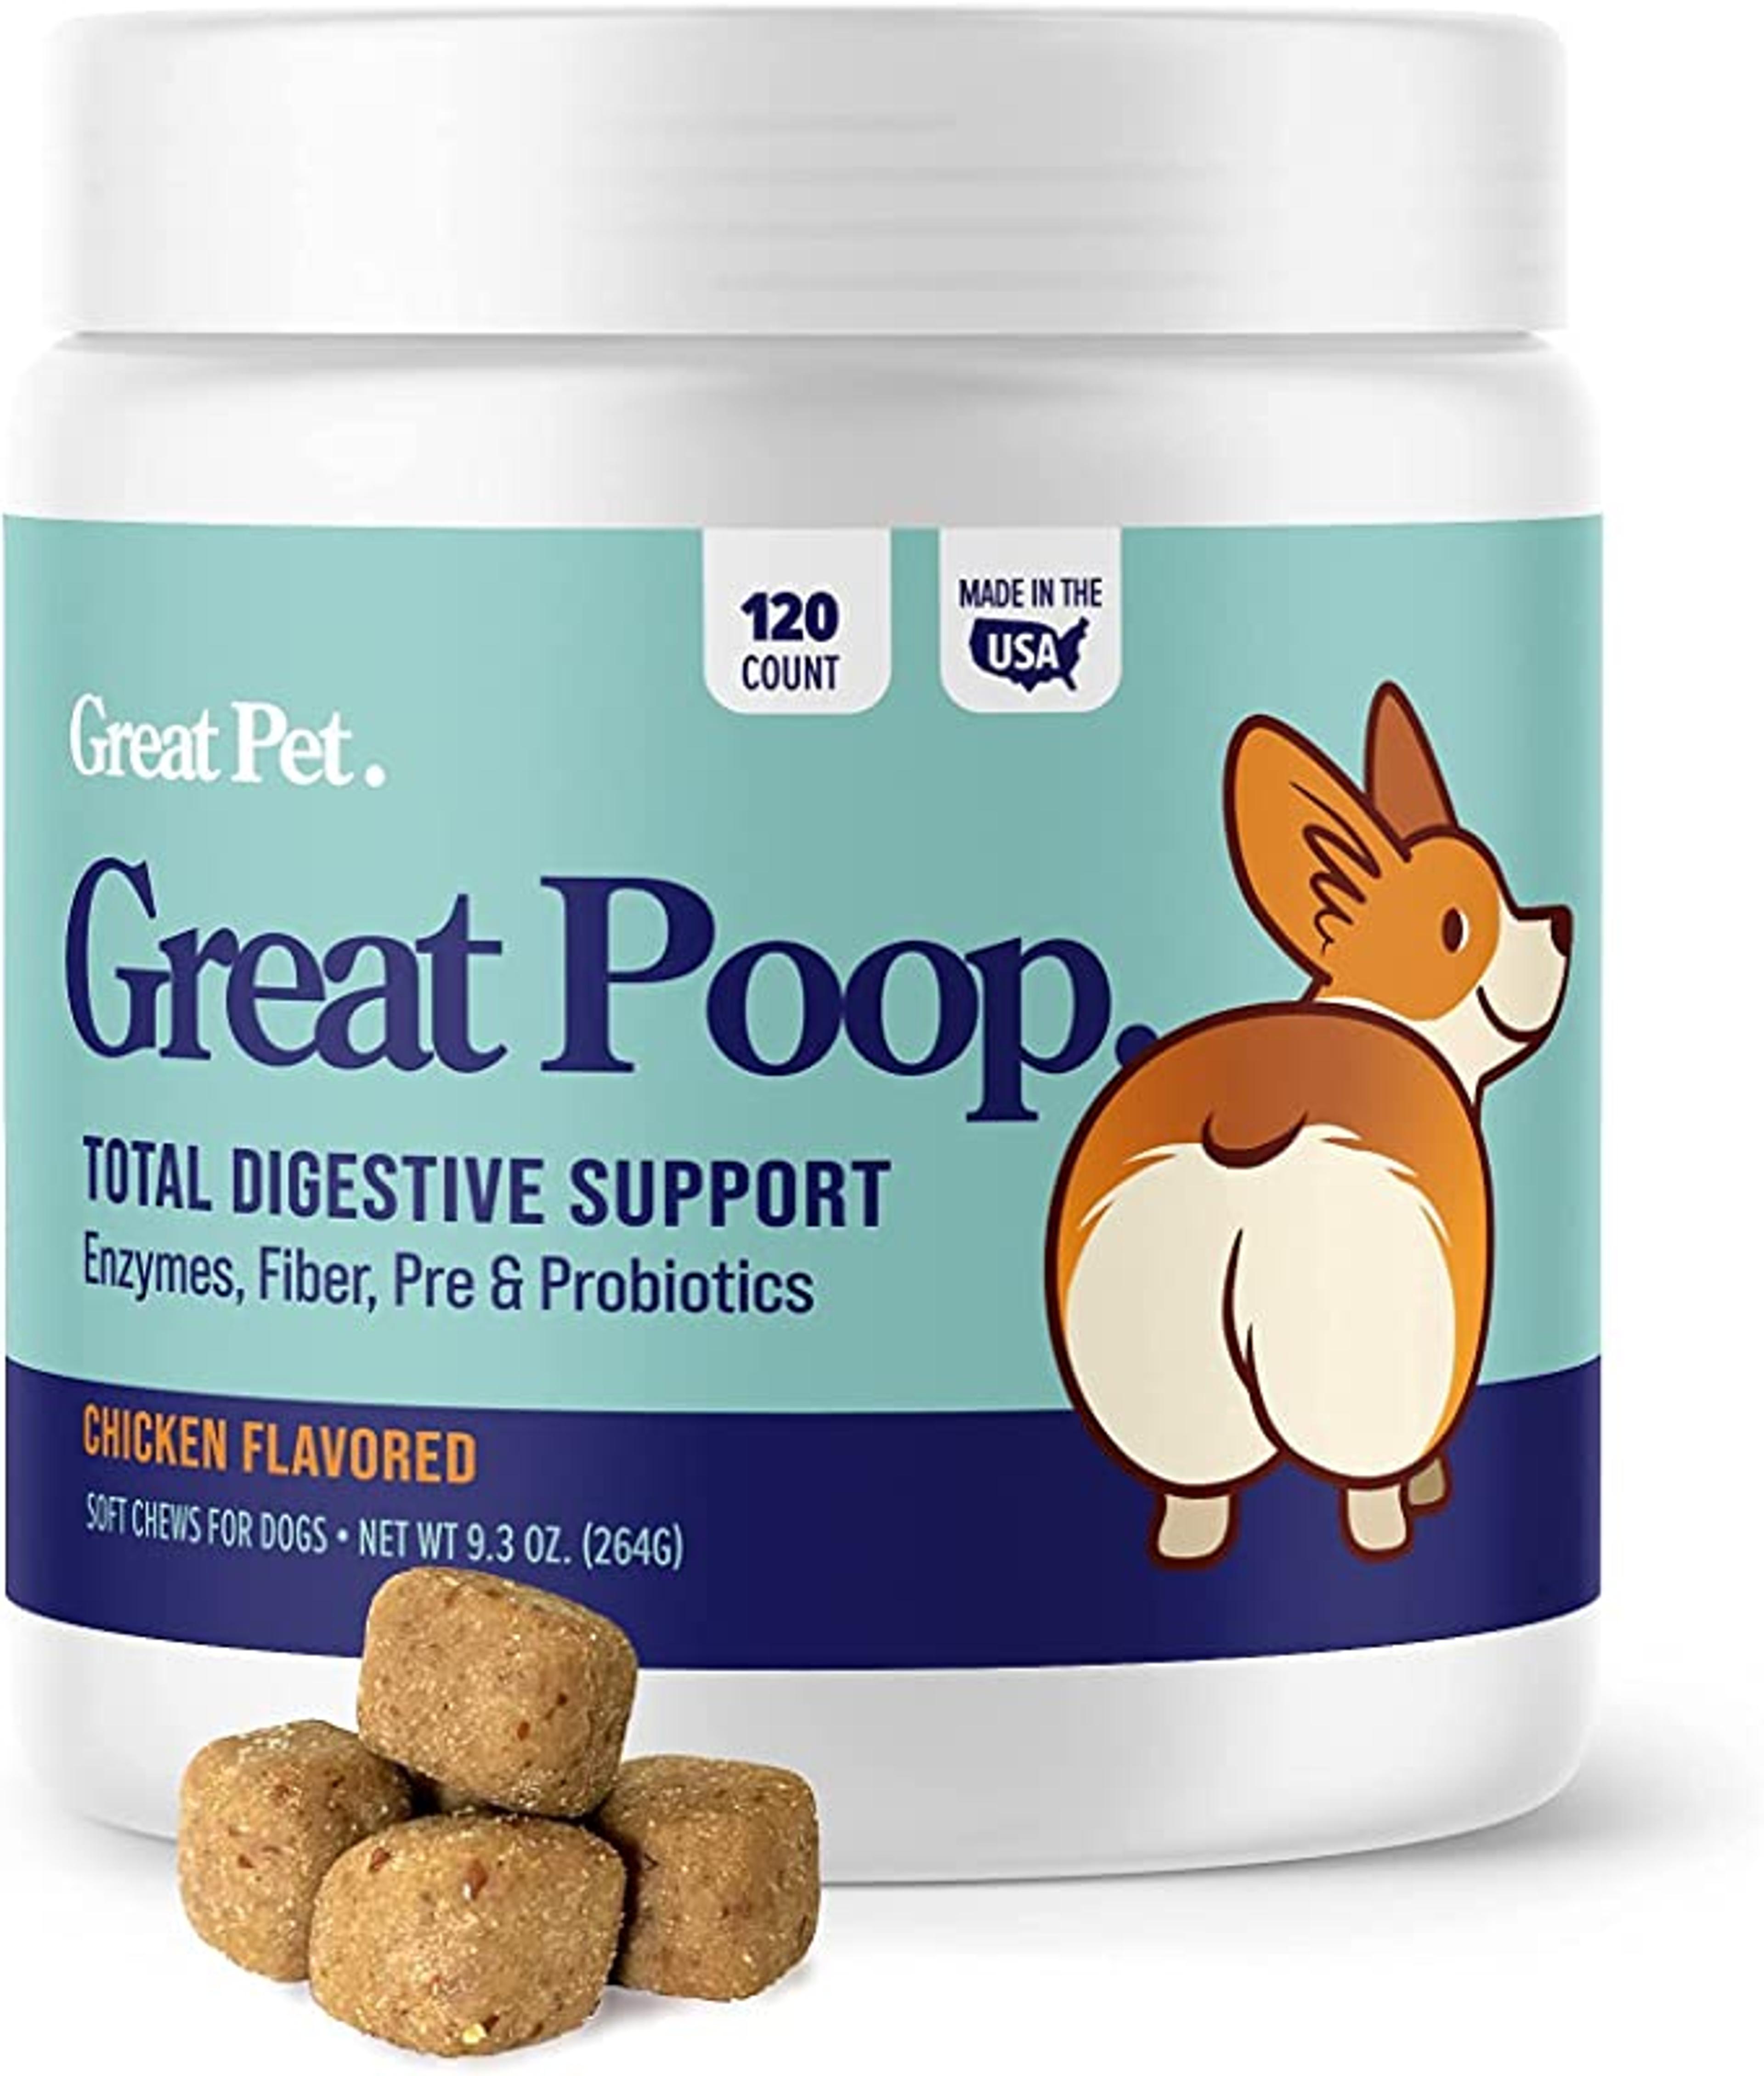 Amazon.com : Great Poop Probiotics for Dogs - A Fiber for Dogs Supplement with Dog Probiotics and Digestive Enzymes for a Healthy Gut, Firm Stool & Diarrhea Relief - Chicken Flavored Pet Soft Chews with Prebiotics : Pet Supplies